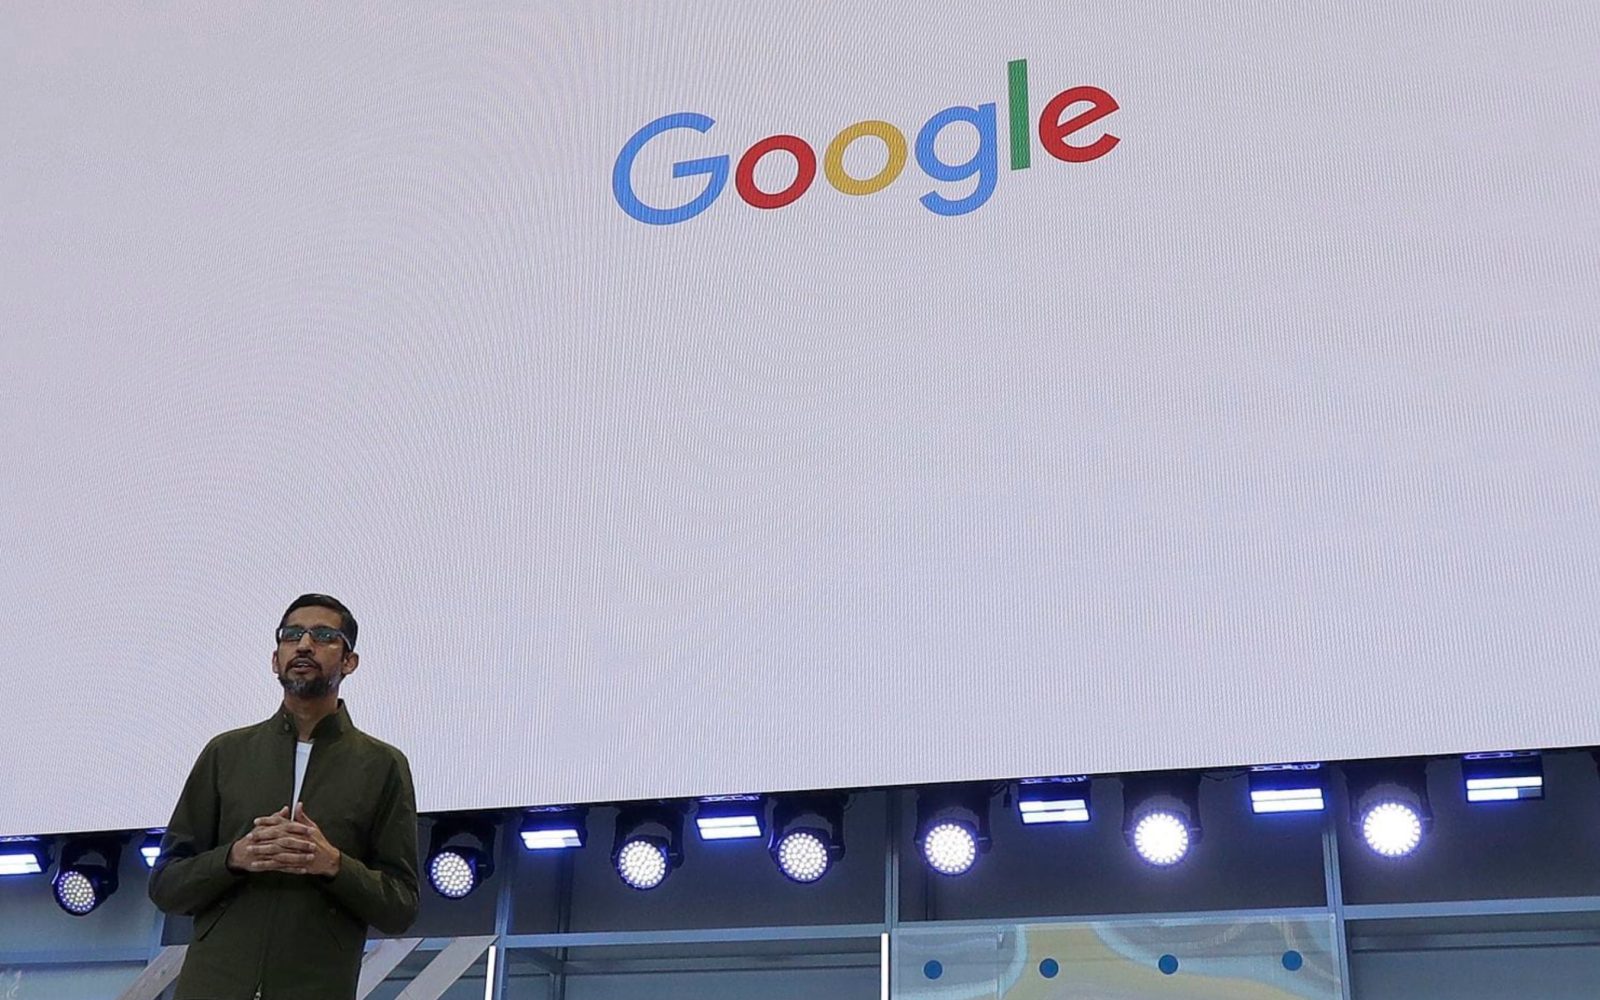 Google CEO met quietly with leaders at the Pentagon to talk AI